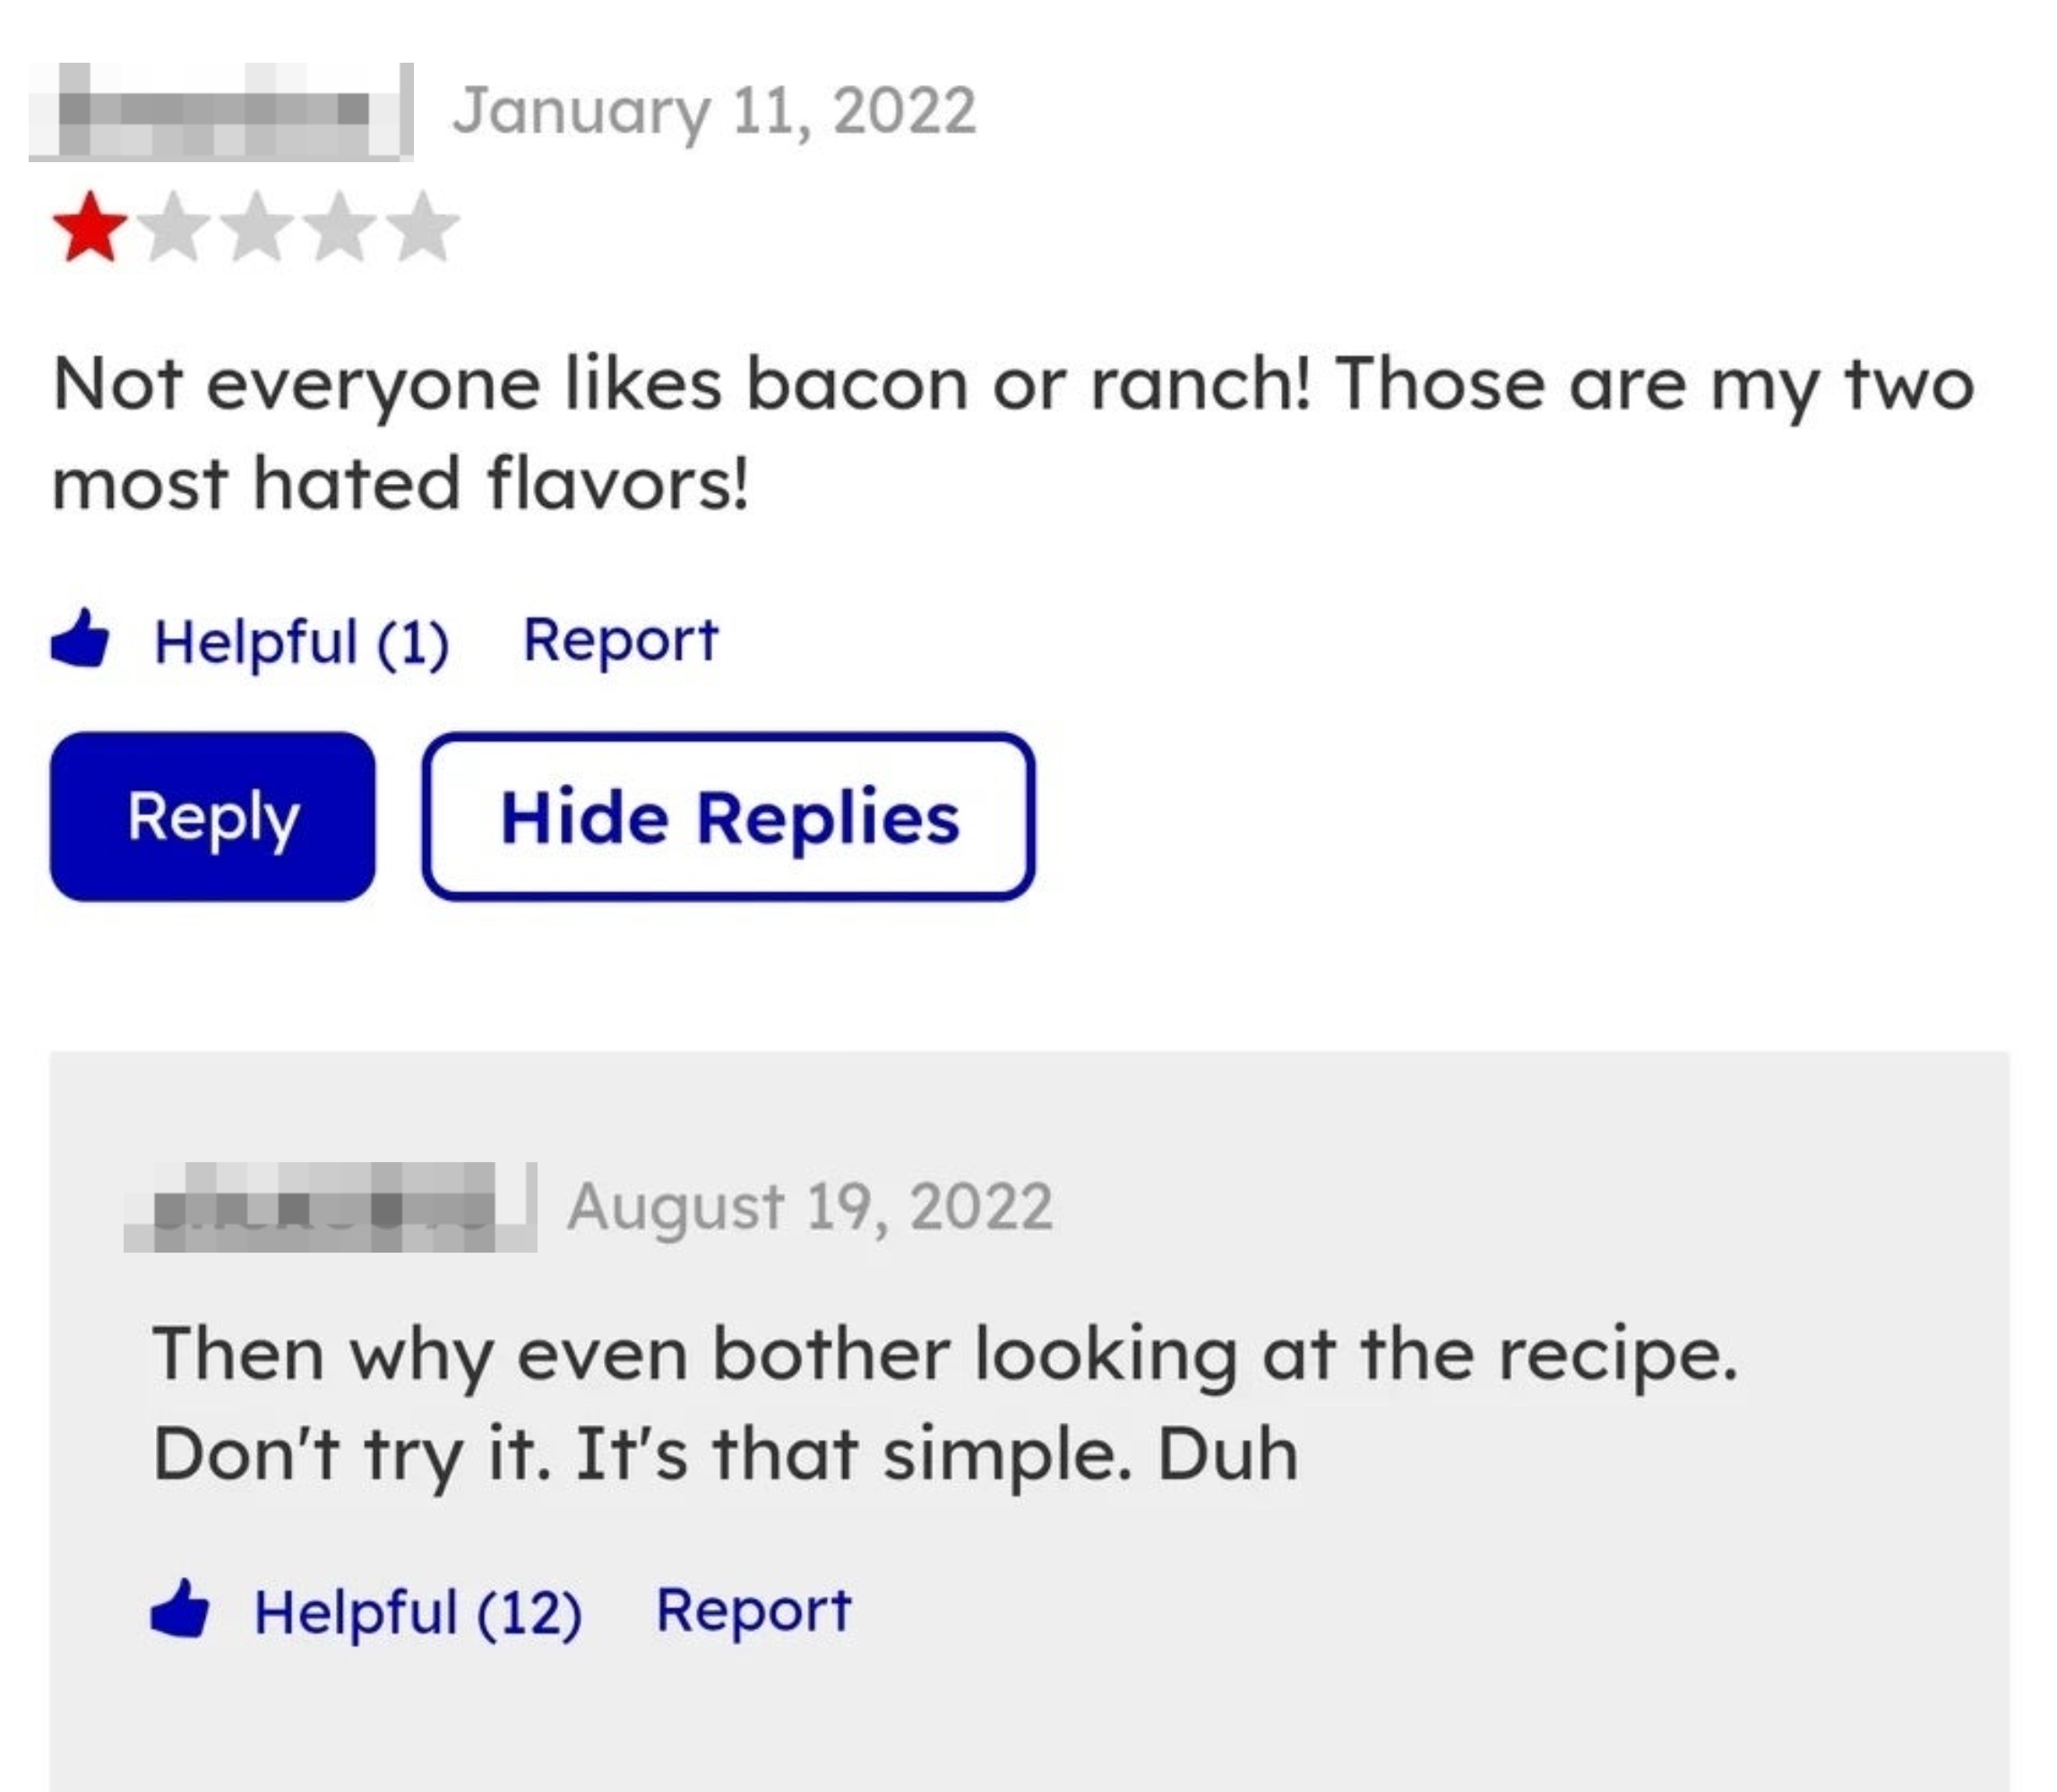 A 1-star review from someone that reads, &quot;Not everyone likes bacon or ranch! Those are my two most hated flavors&quot;